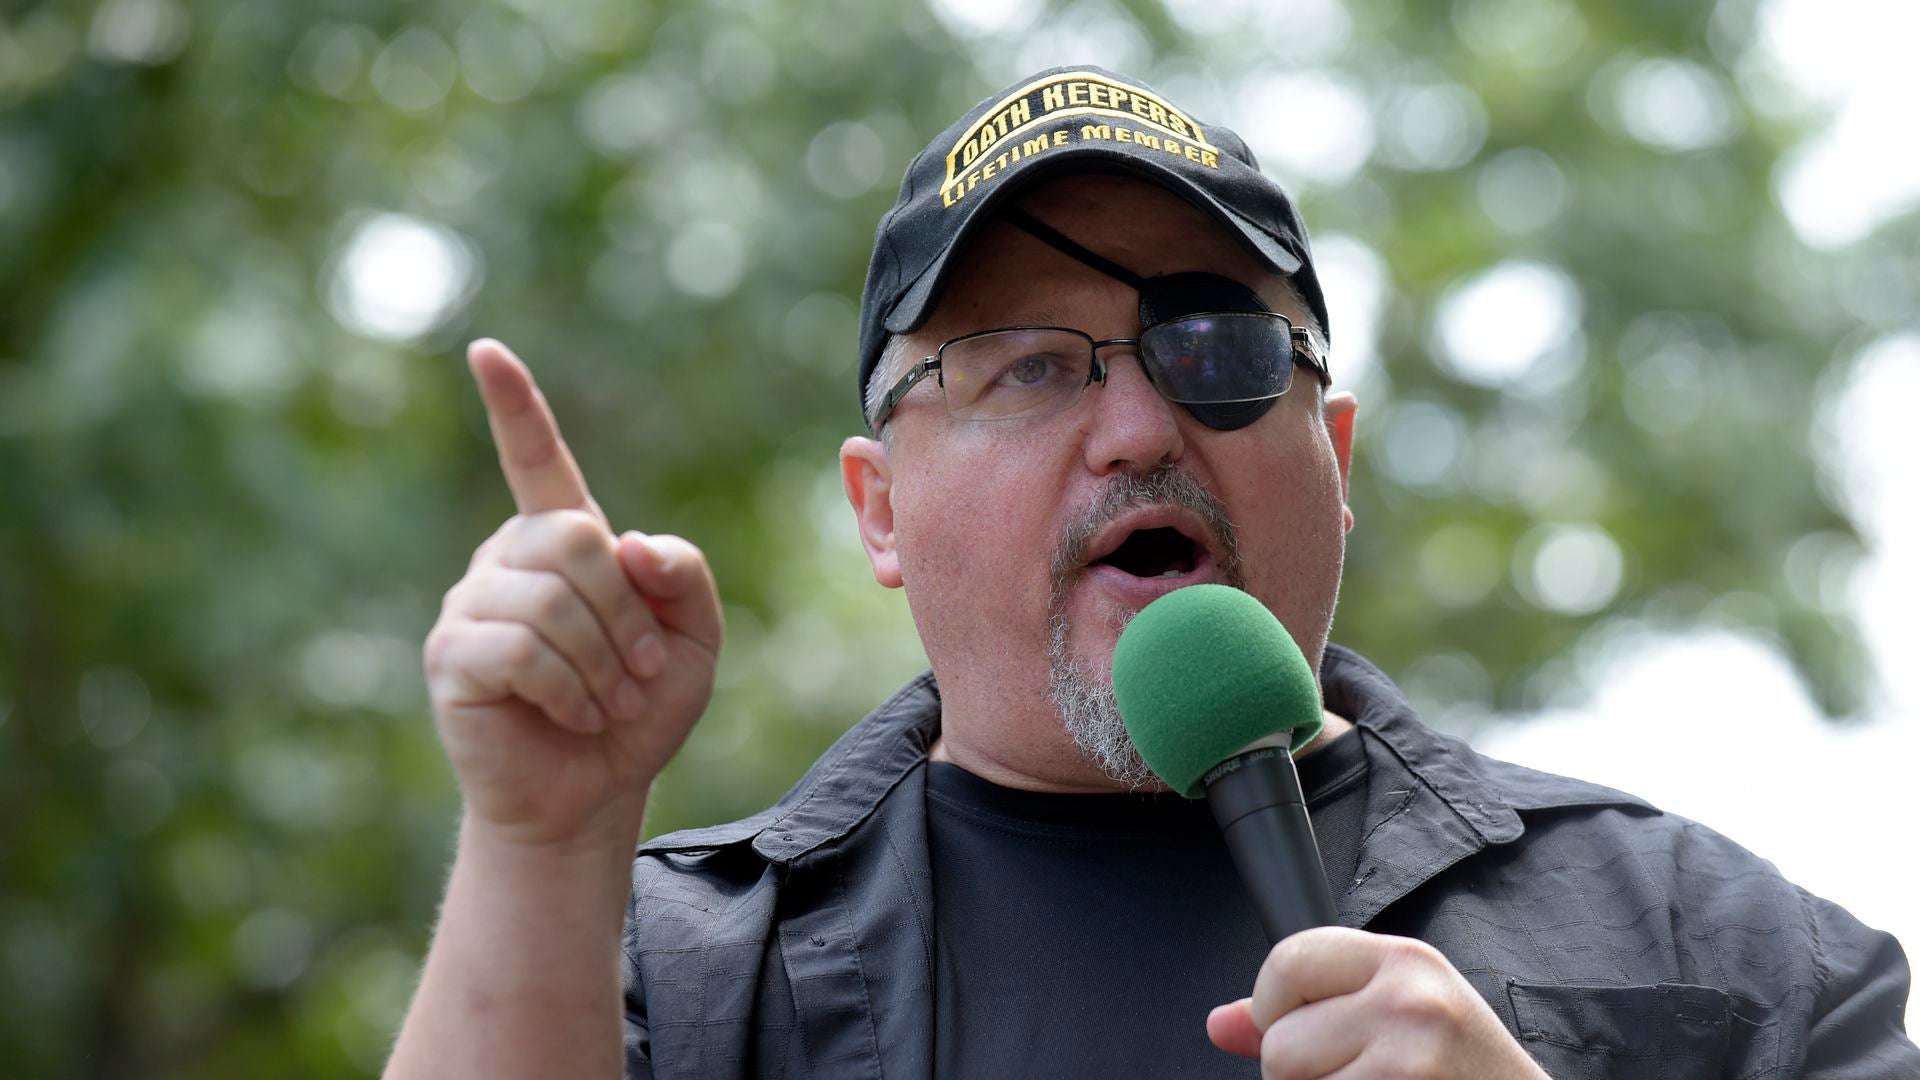 image showing Stewart Rhodes of the Oath Keepers, who was just arrested for seditious conspiracy on January 6